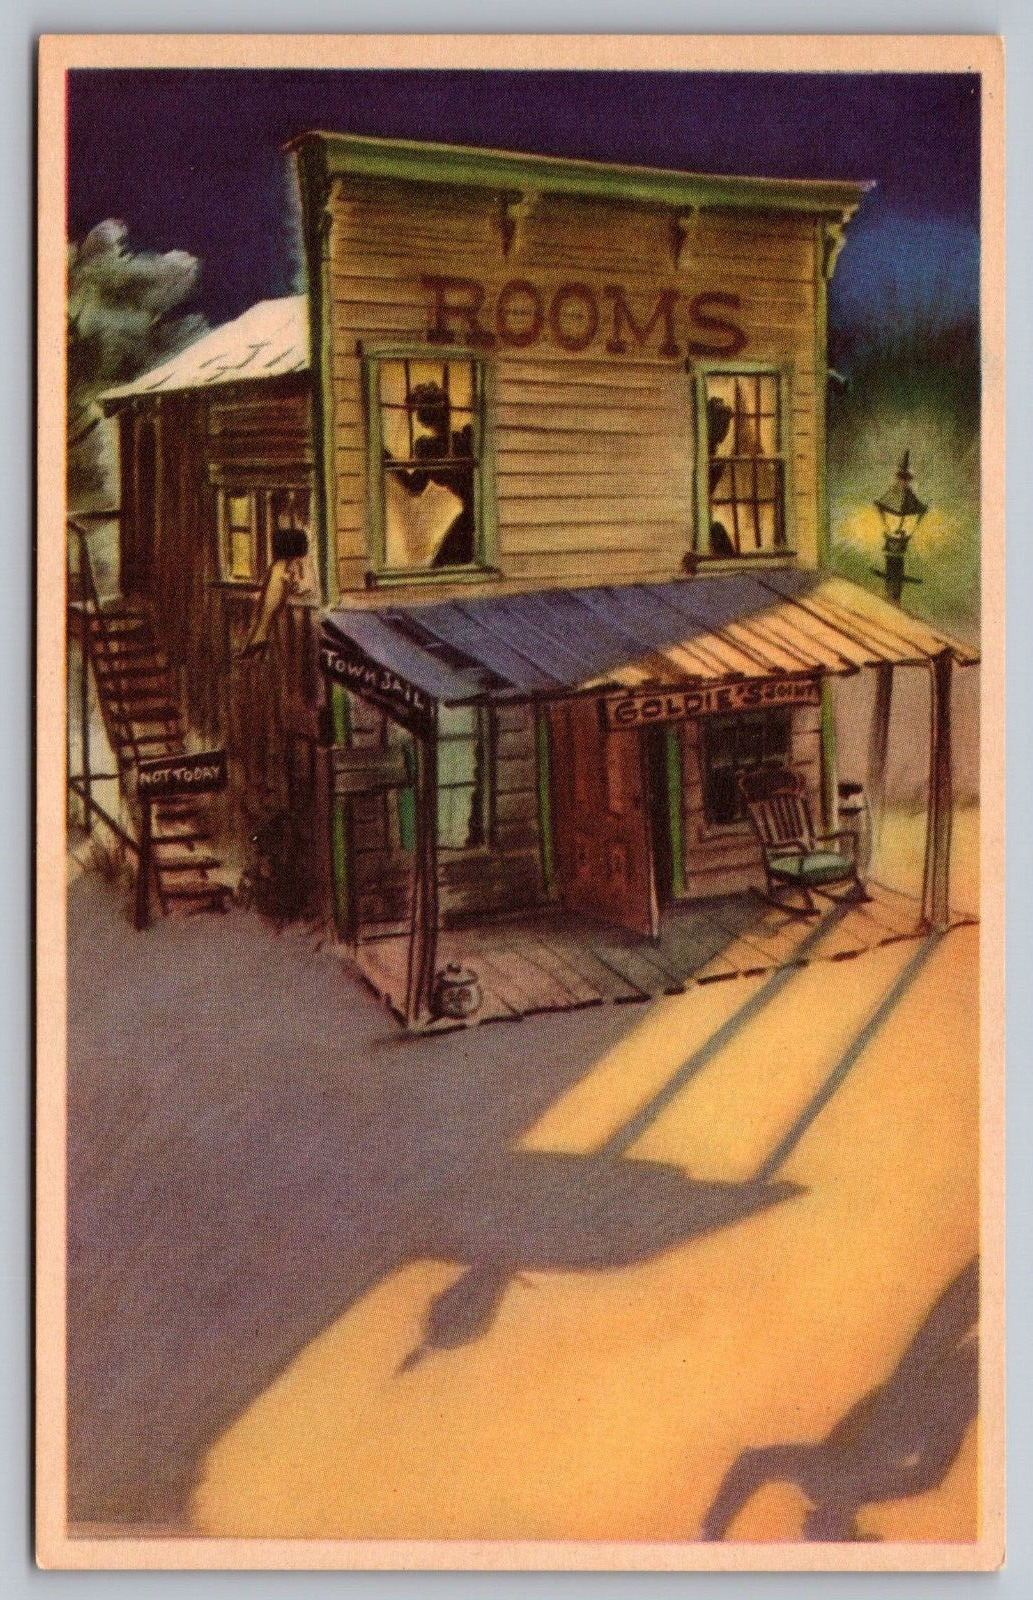 Goldie\'s Joint Ghost Town Knott\'s Berry Place Buena Park California VTG Postcard